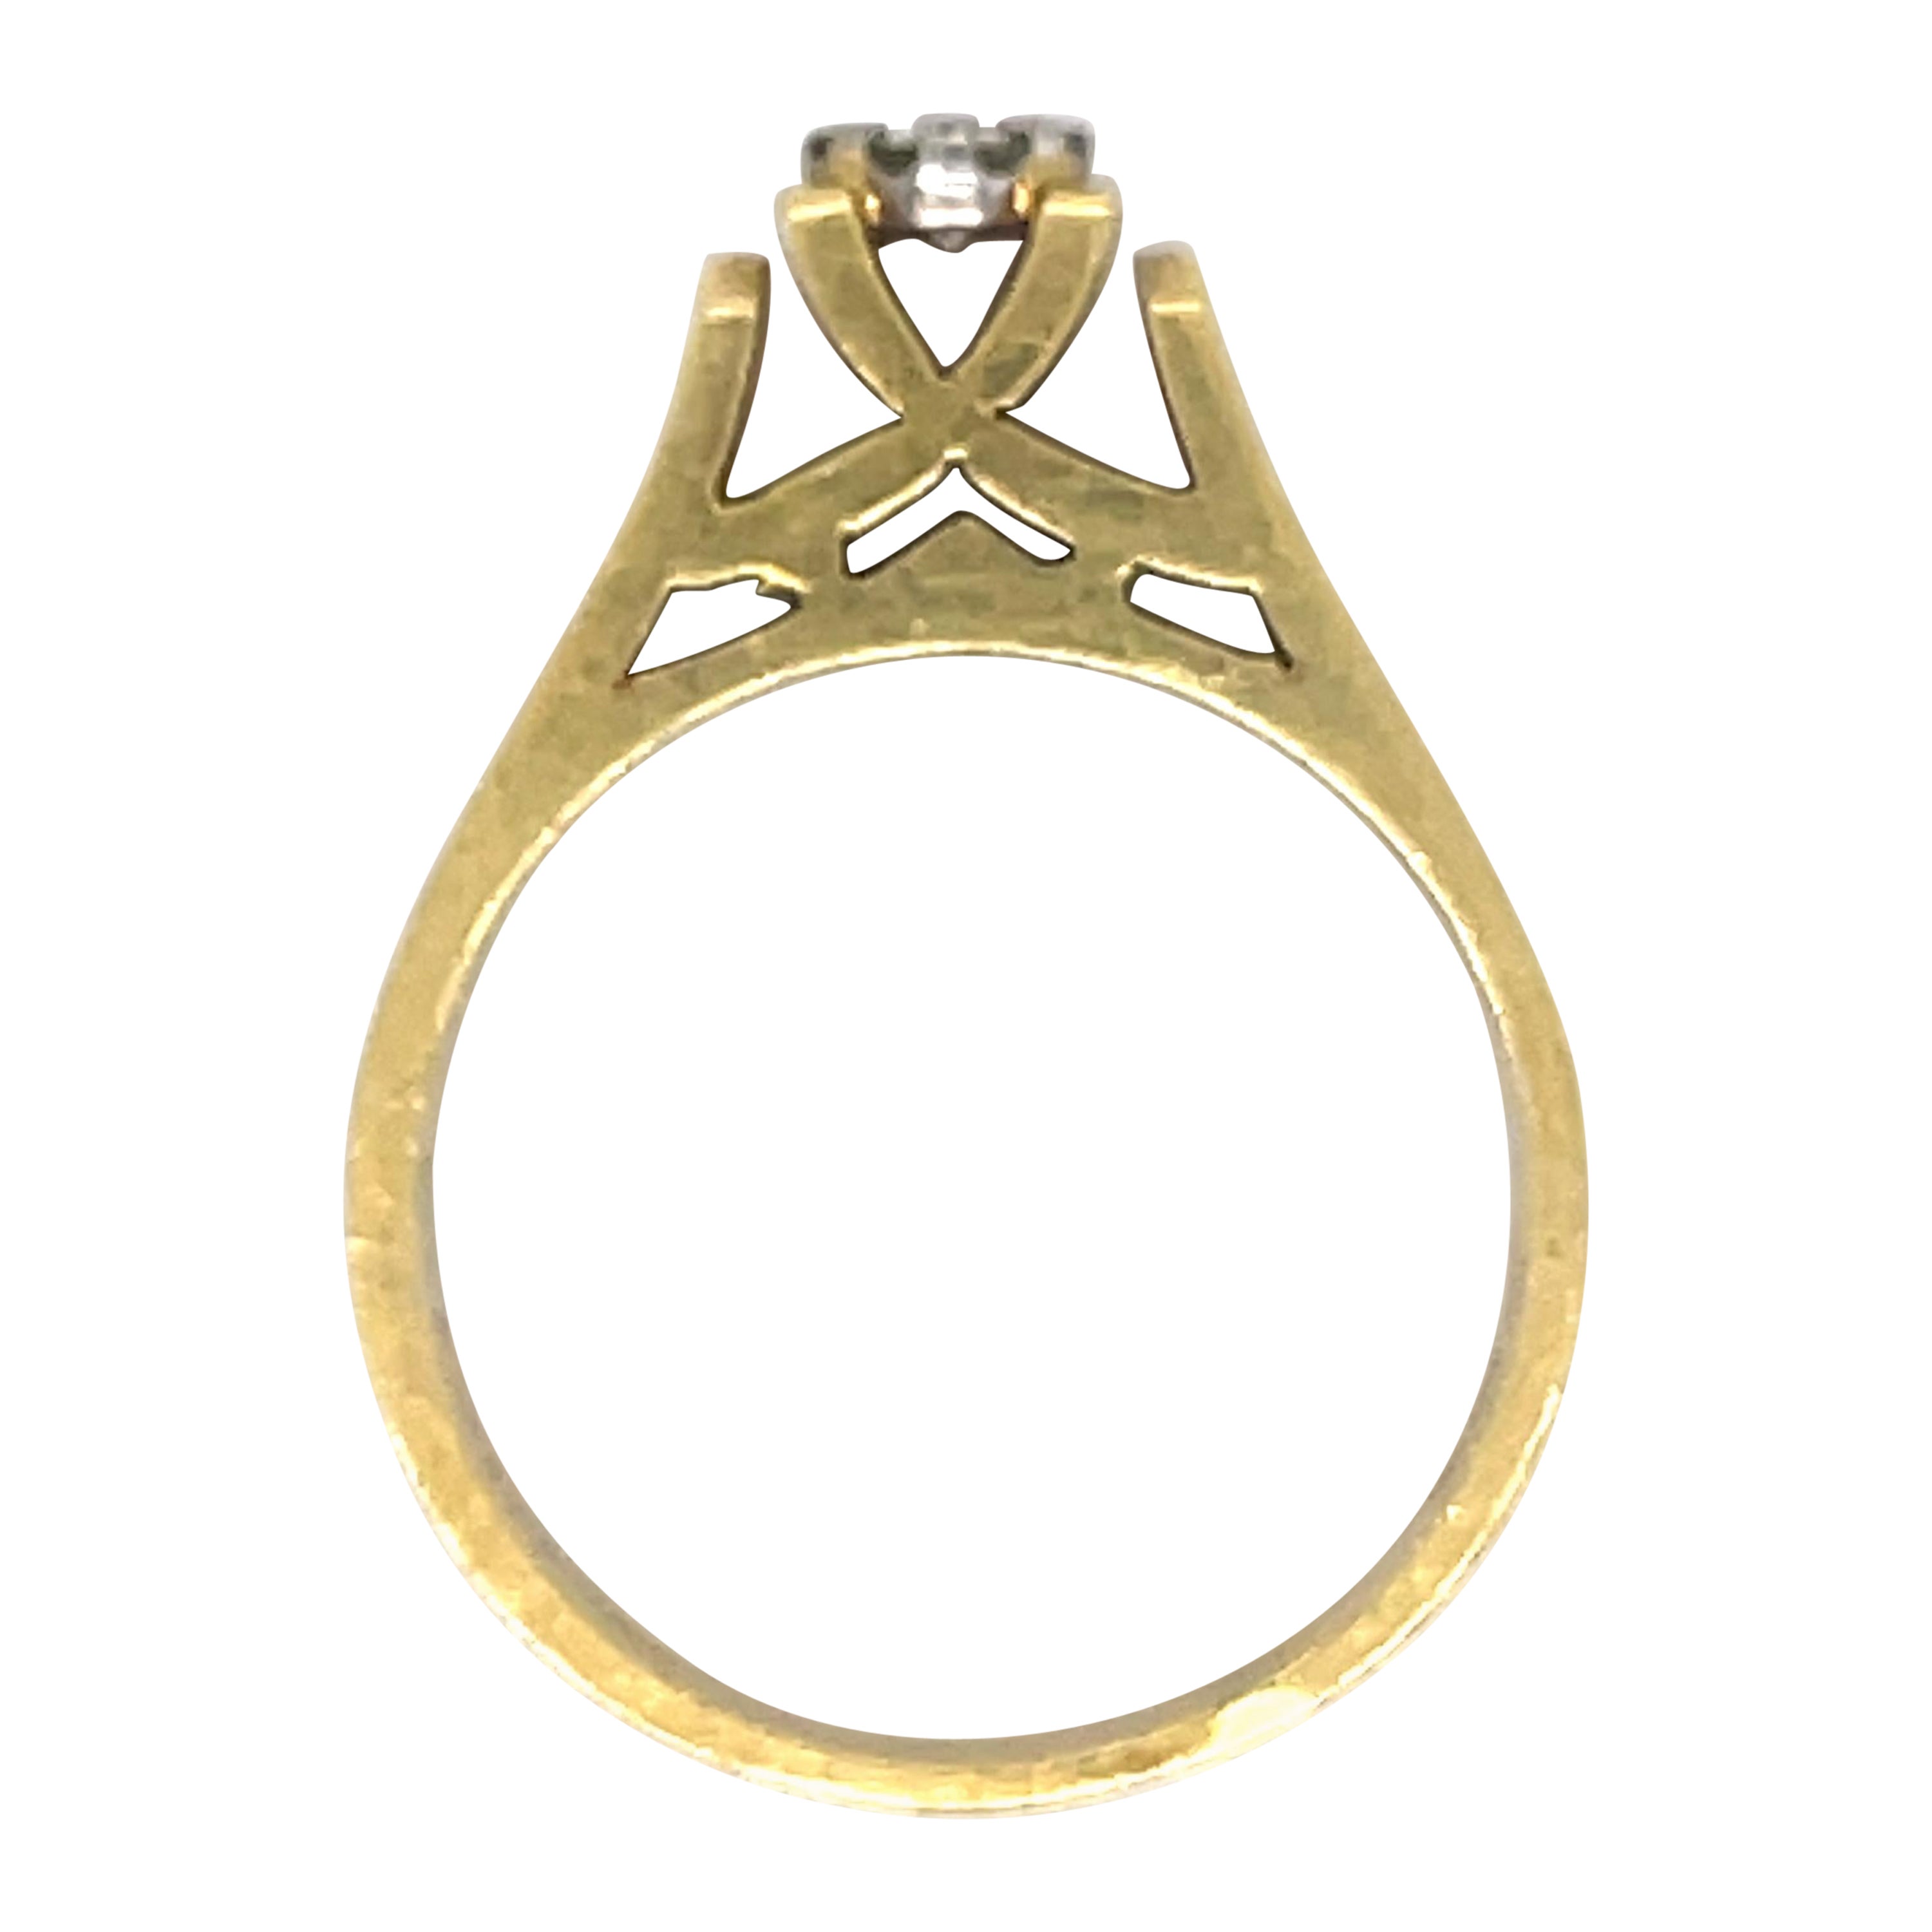 Unique Engagement Ring, 0.25CT diamond, 18K yellow gold, detailed high setting For Sale